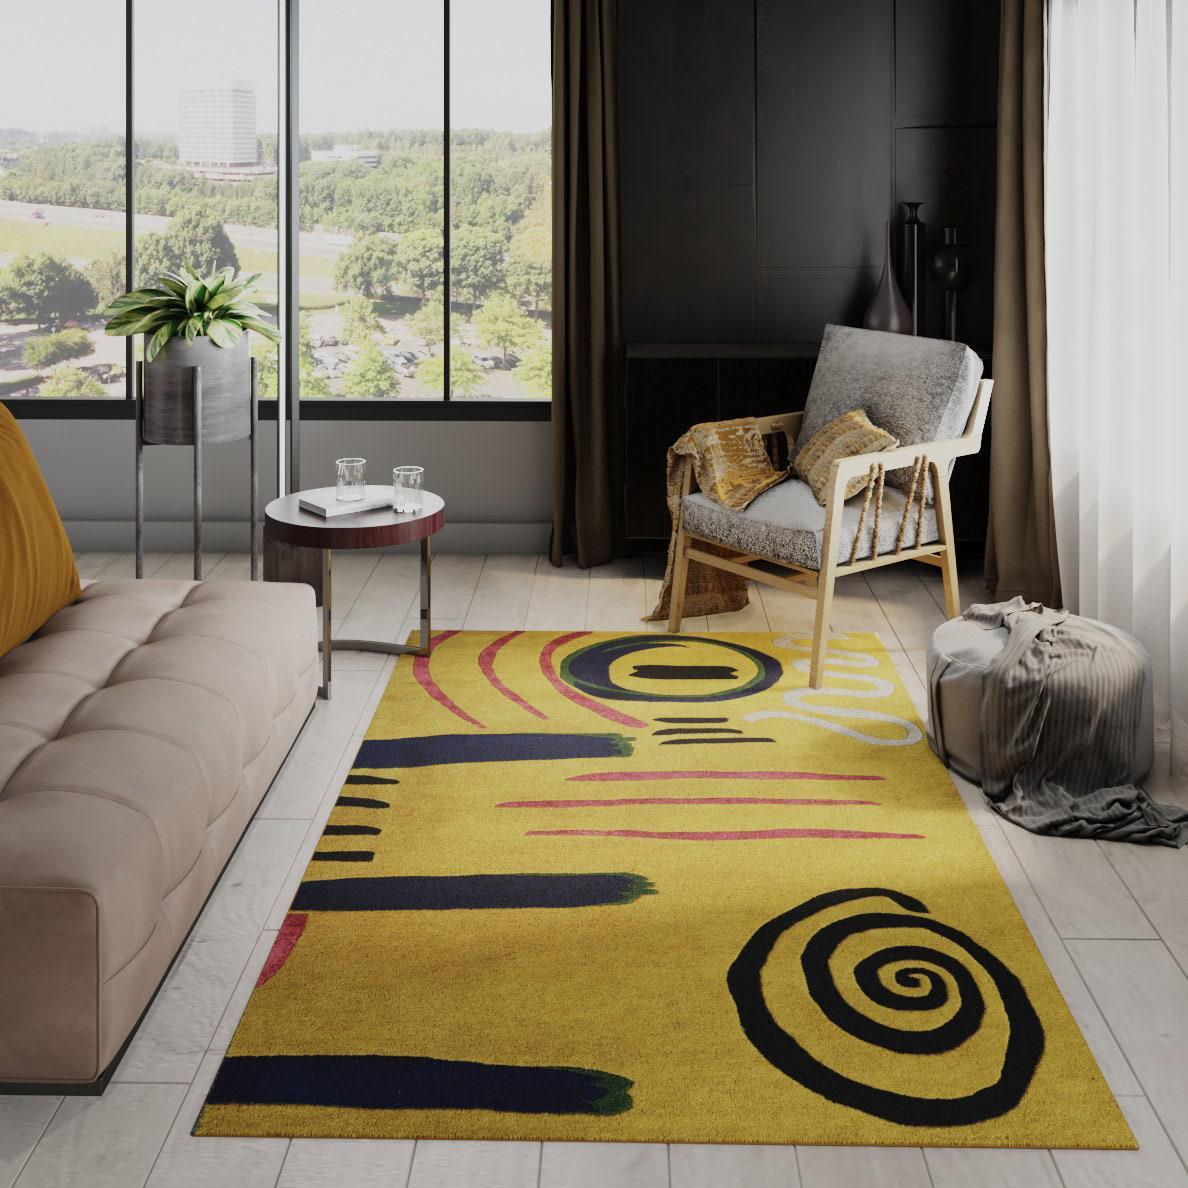 Hand Tufted Rug Hand Made Modern Area Rugs for Room Home Decor Carpet Rugs for Living Room Kids Decor Contemporary Abstract Design Yellow